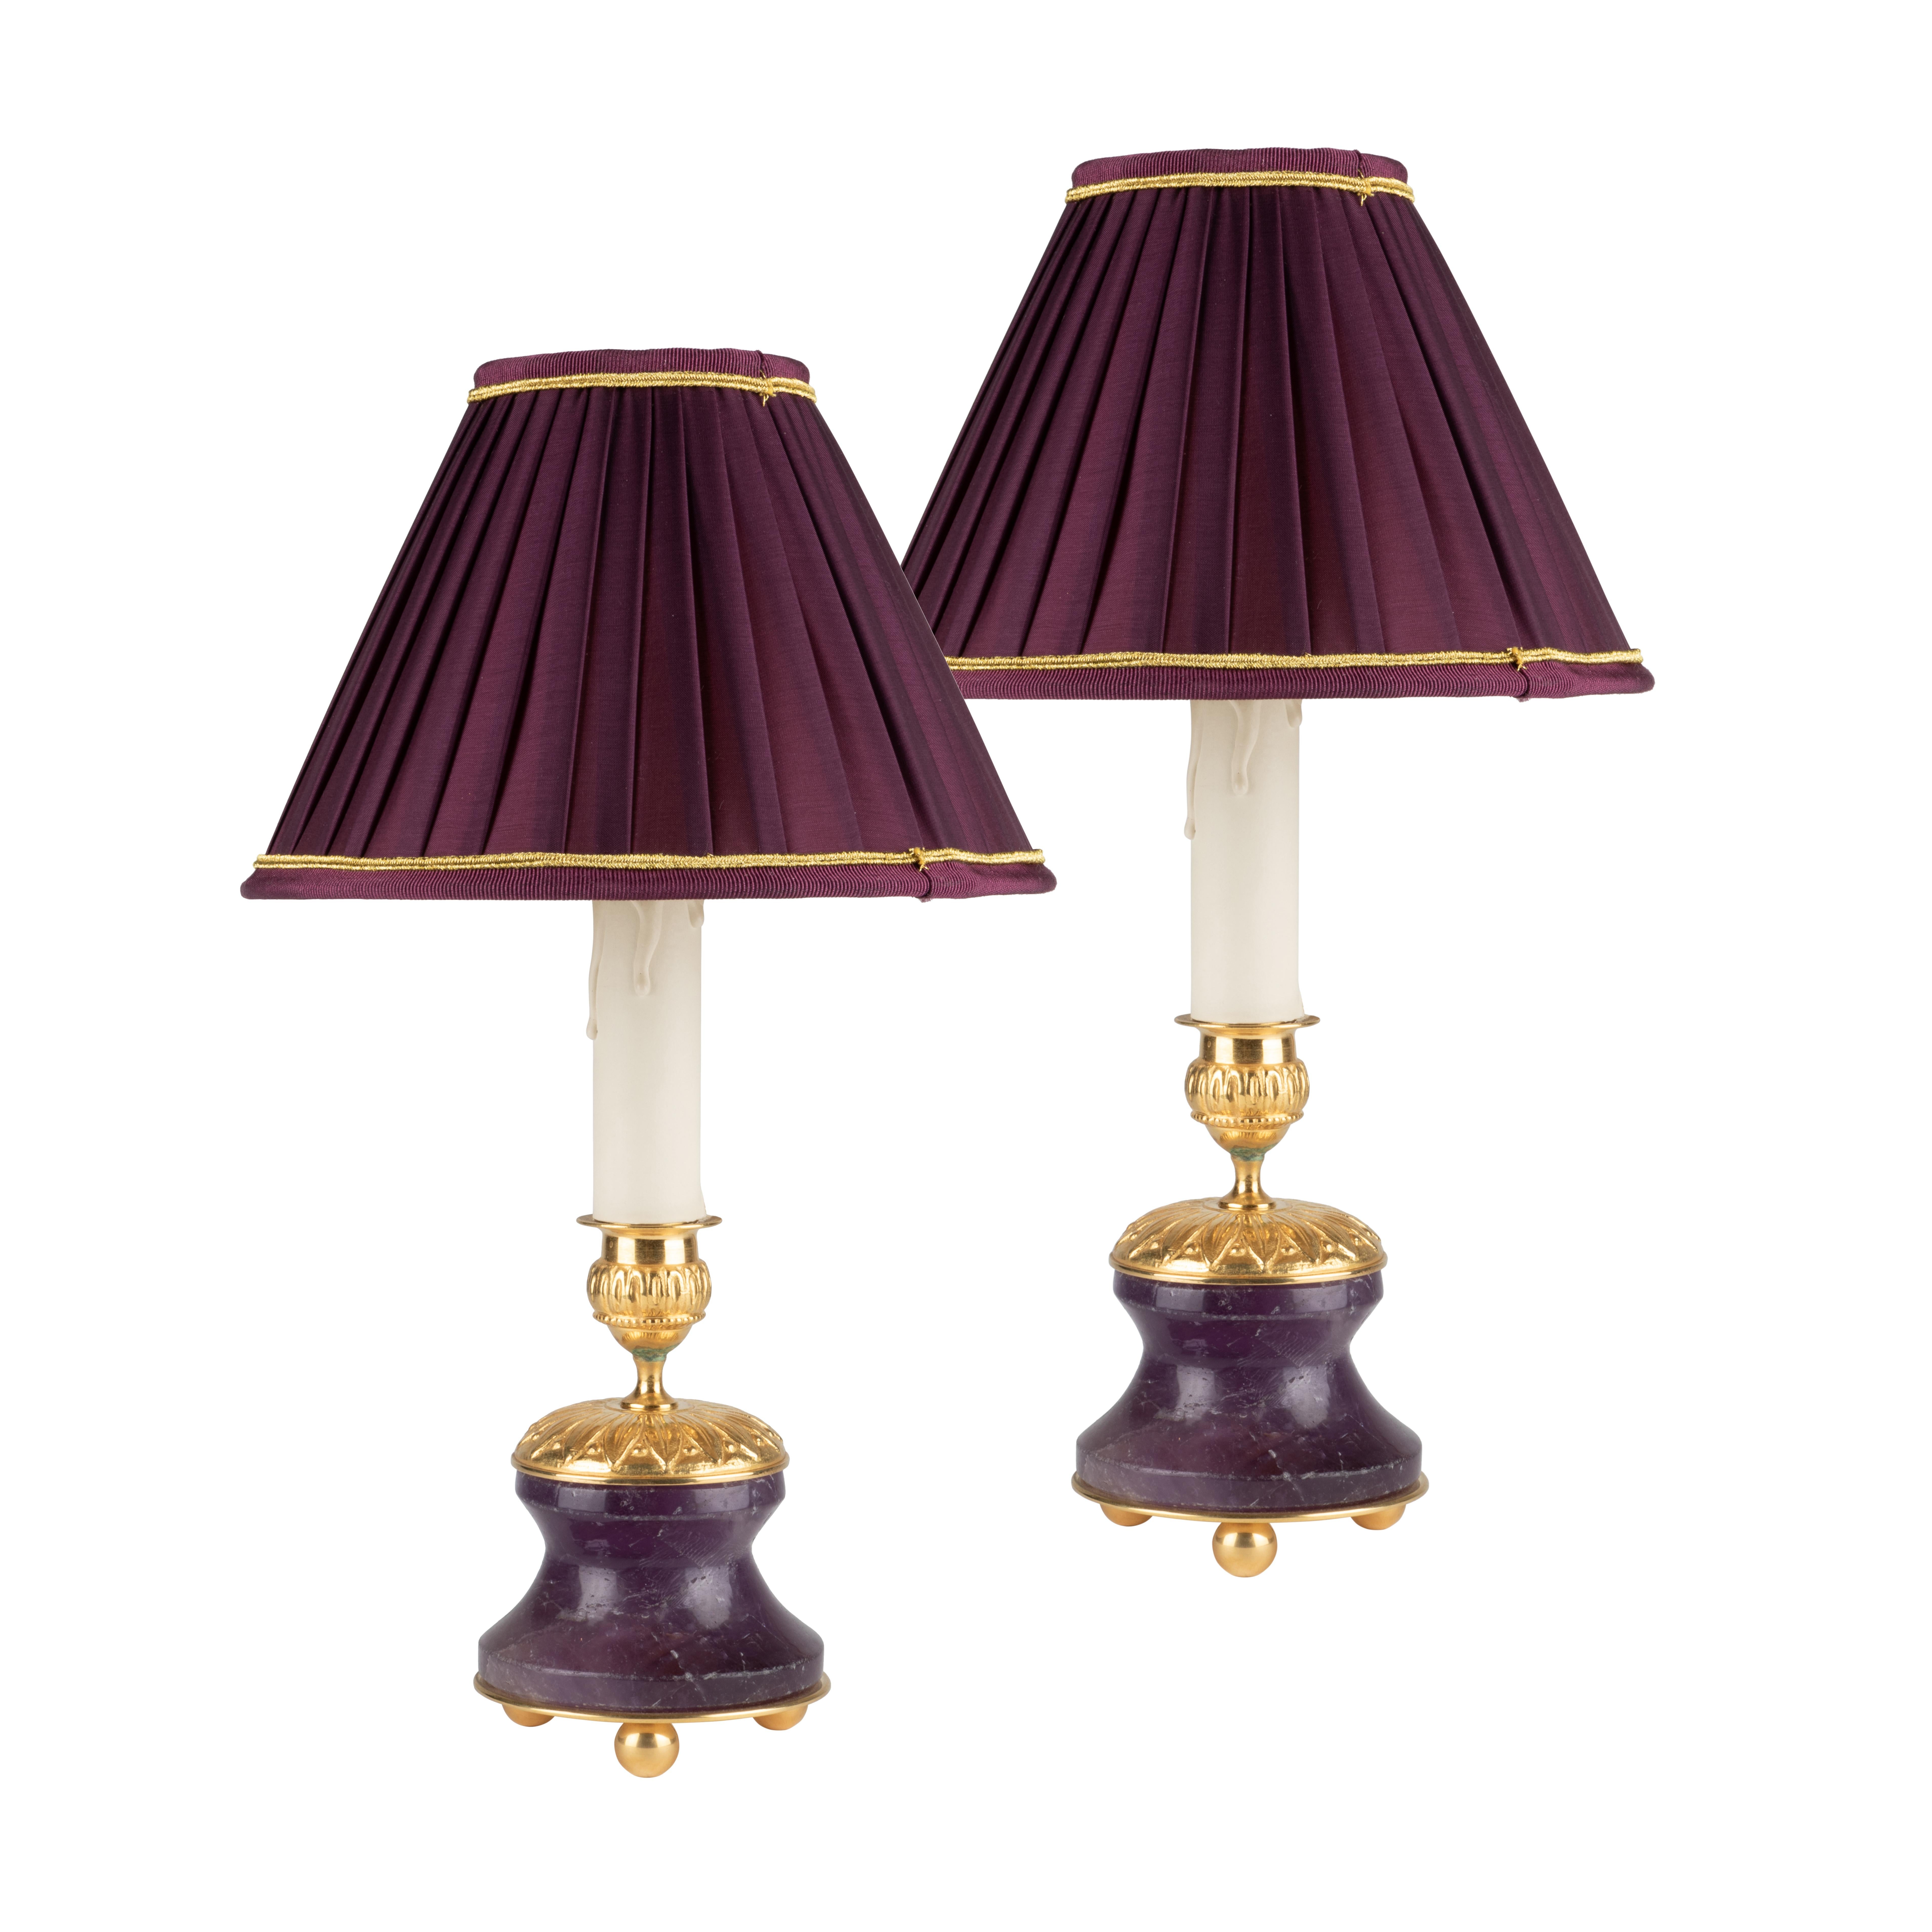 First Empire style pair in amethyst stone and 24 K ormolu gilding bronze .
Could be used as well as candlesticks .
Color of the lampshades could be customized by request.
Made in Paris.